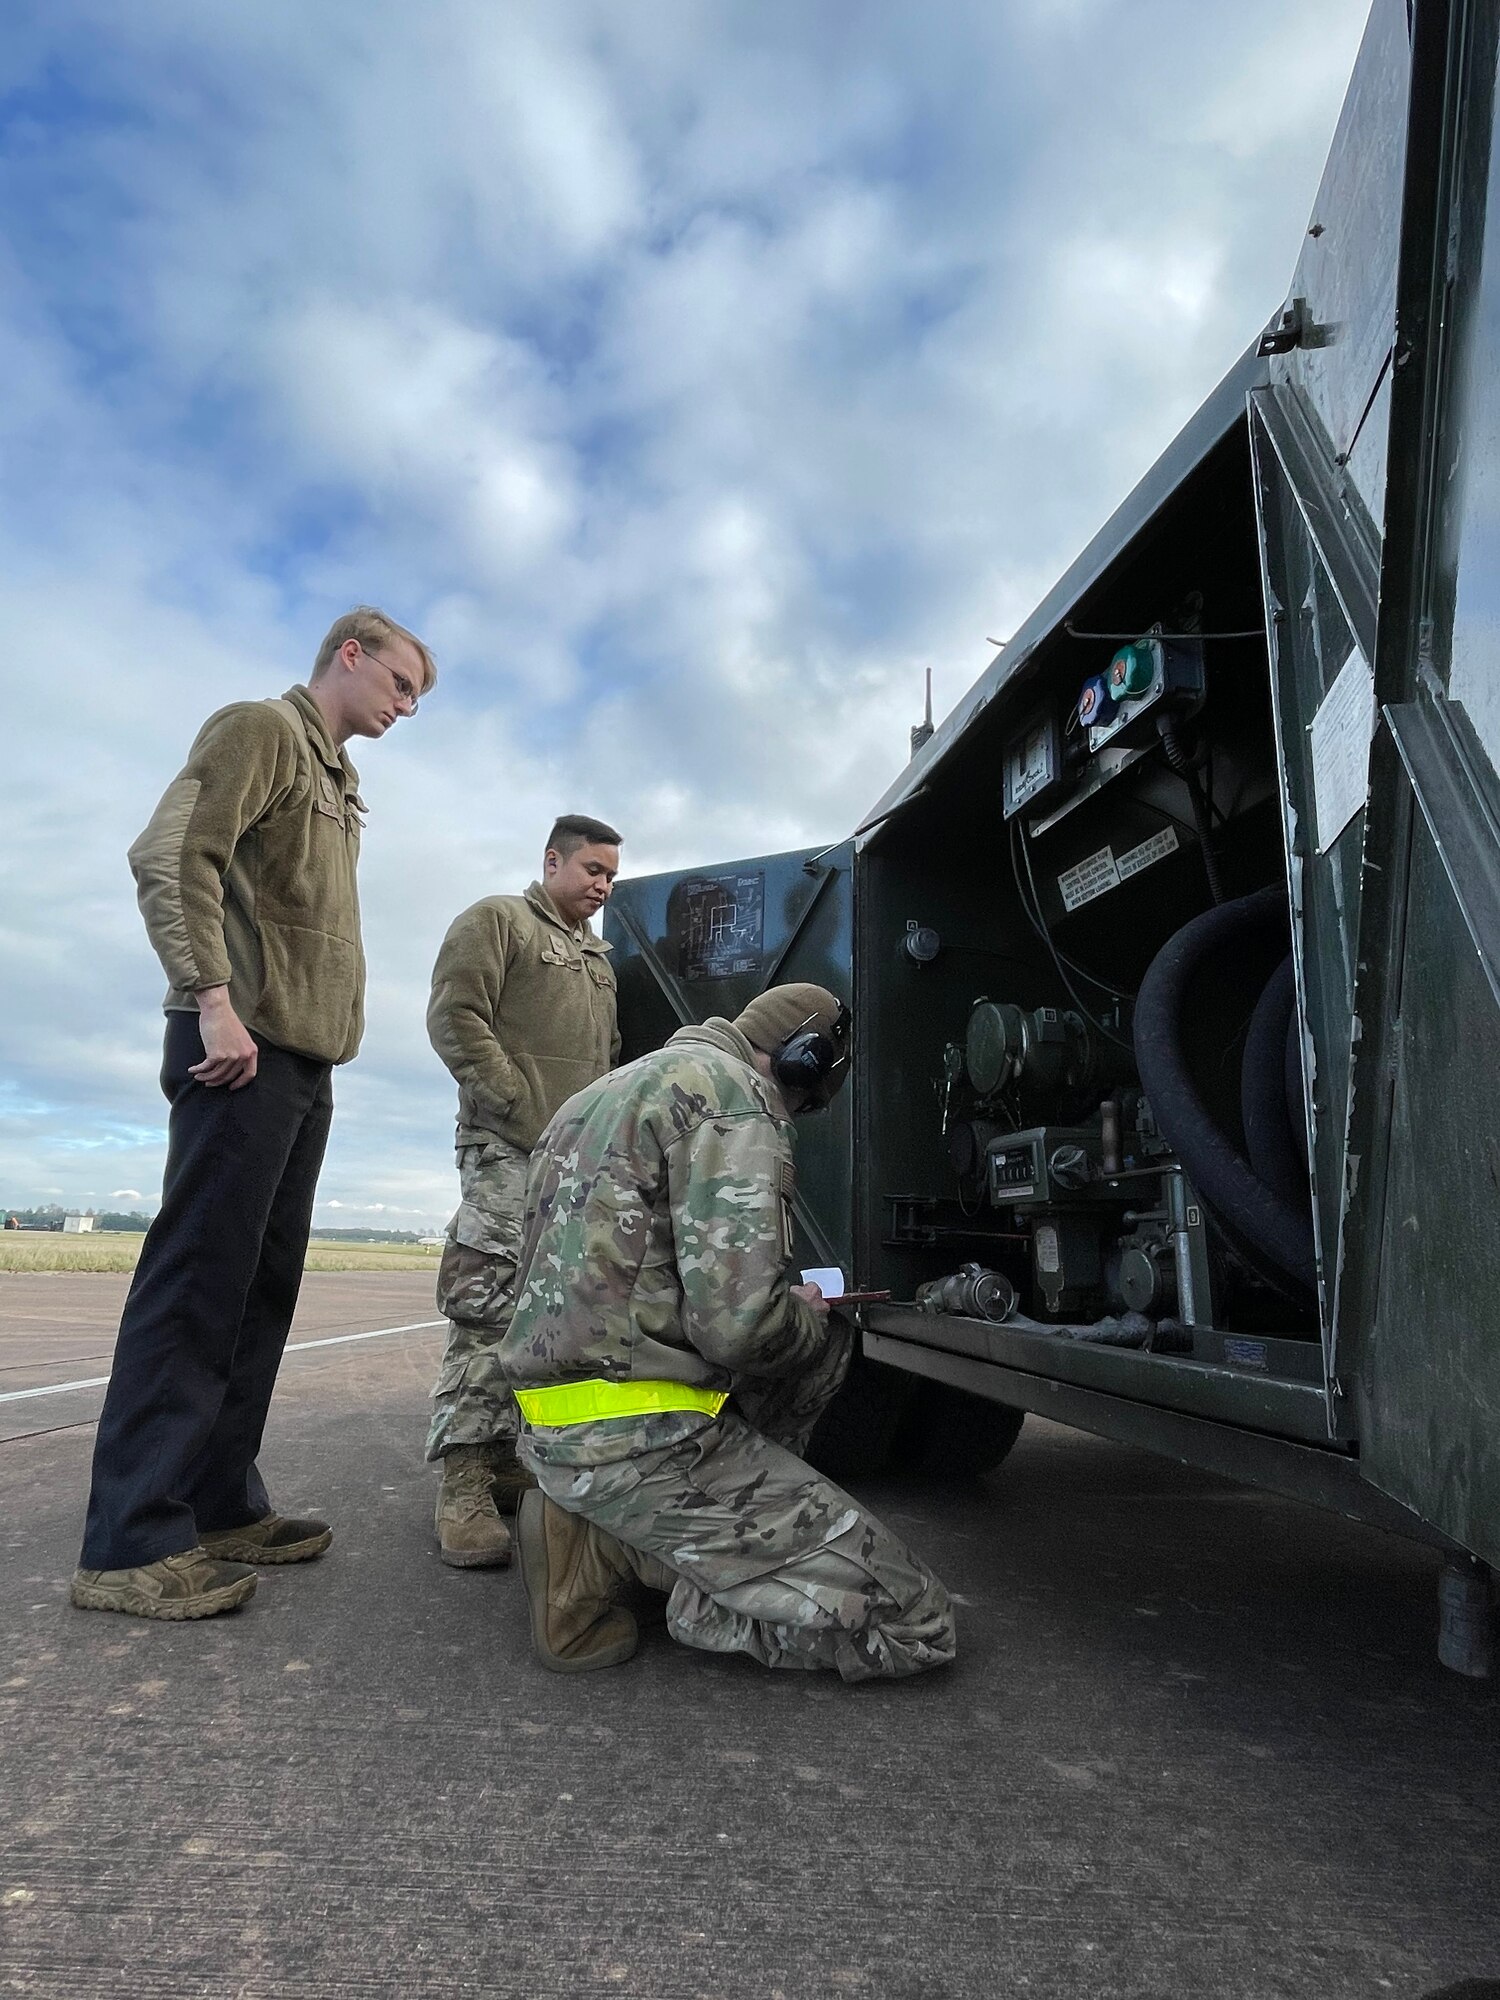 U.S. Airmen assigned to the 100th Air Refueling Wing account for diesel fuel during exercise Castle Forge at Royal Air Force Fairford, England, Nov. 3, 2021. Exercising elements of Agile Combat Employment enables U.S. forces in Europe to operate from locations with varying levels of capacity and support, ensuring Airmen and aircrews are postured to deliver lethal combat power across the spectrum of military operations. In addition to F-15 Eagle aircraft operations in the Black Sea Region, Castle Forge encompasses the USAFE-wide ACE capstone event. Castle Forge’s components will better enable forces to quickly disperse and continue to deliver air power from locations with varying levels of capacity and support, ensuring Airmen are always ready to respond to potential threats. (U.S. Air Force photo by Senior Airman Joseph Barron)